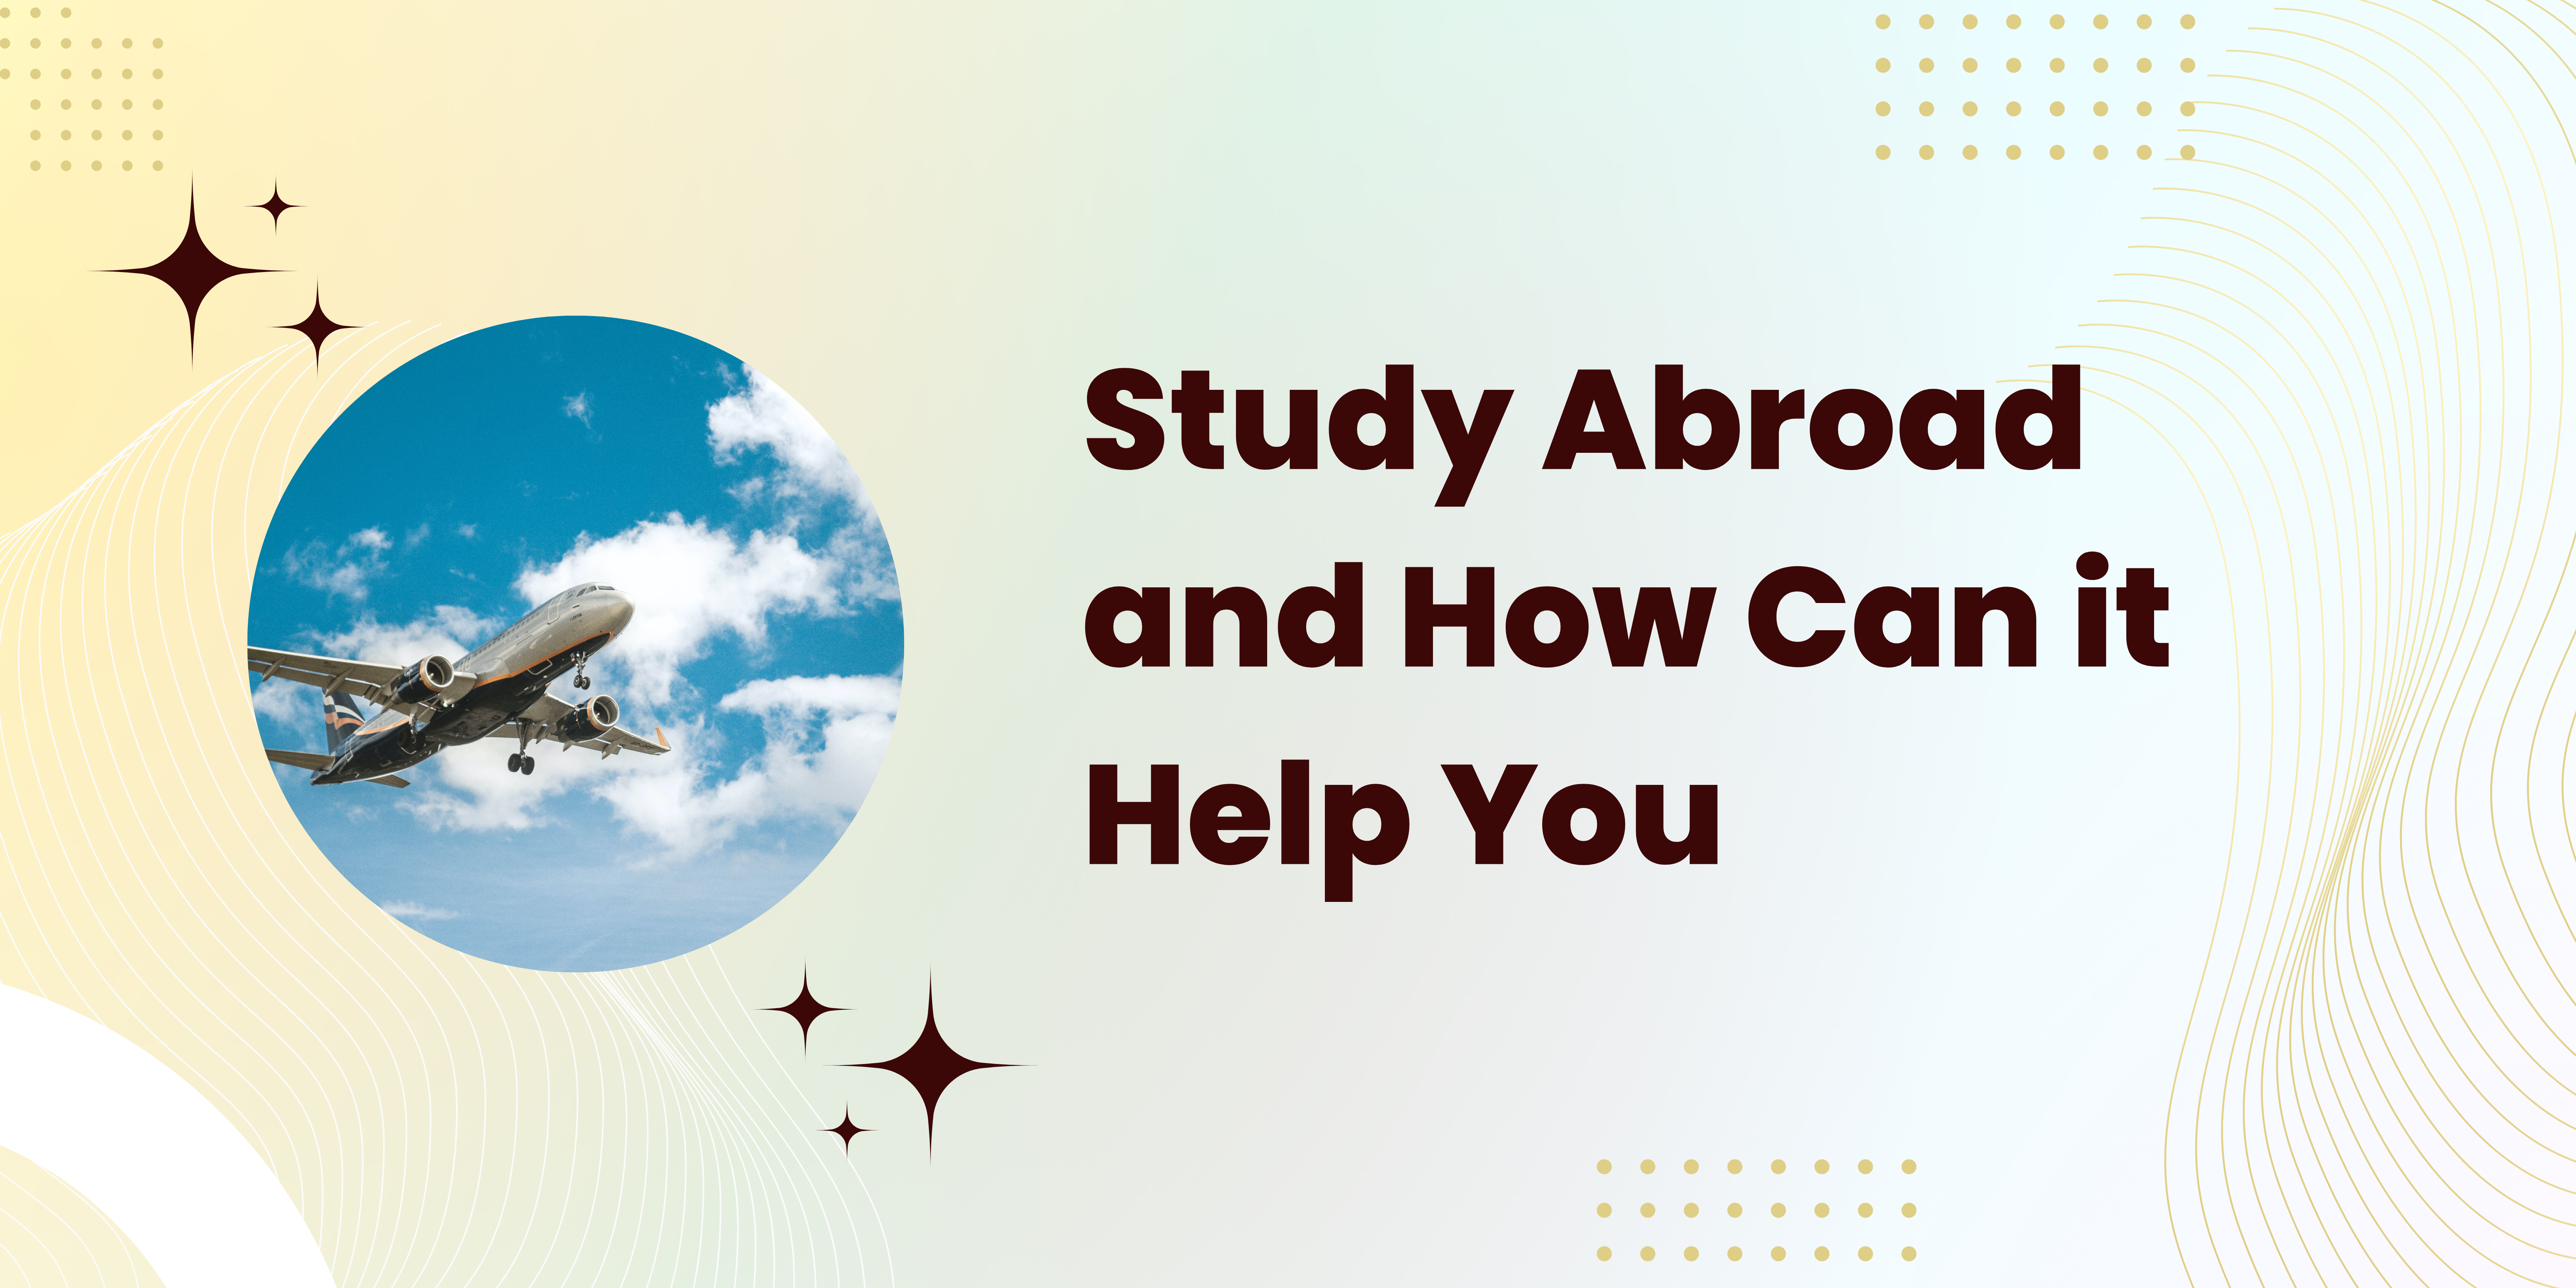 You are currently viewing What is Studying Abroad and How Can it Help You